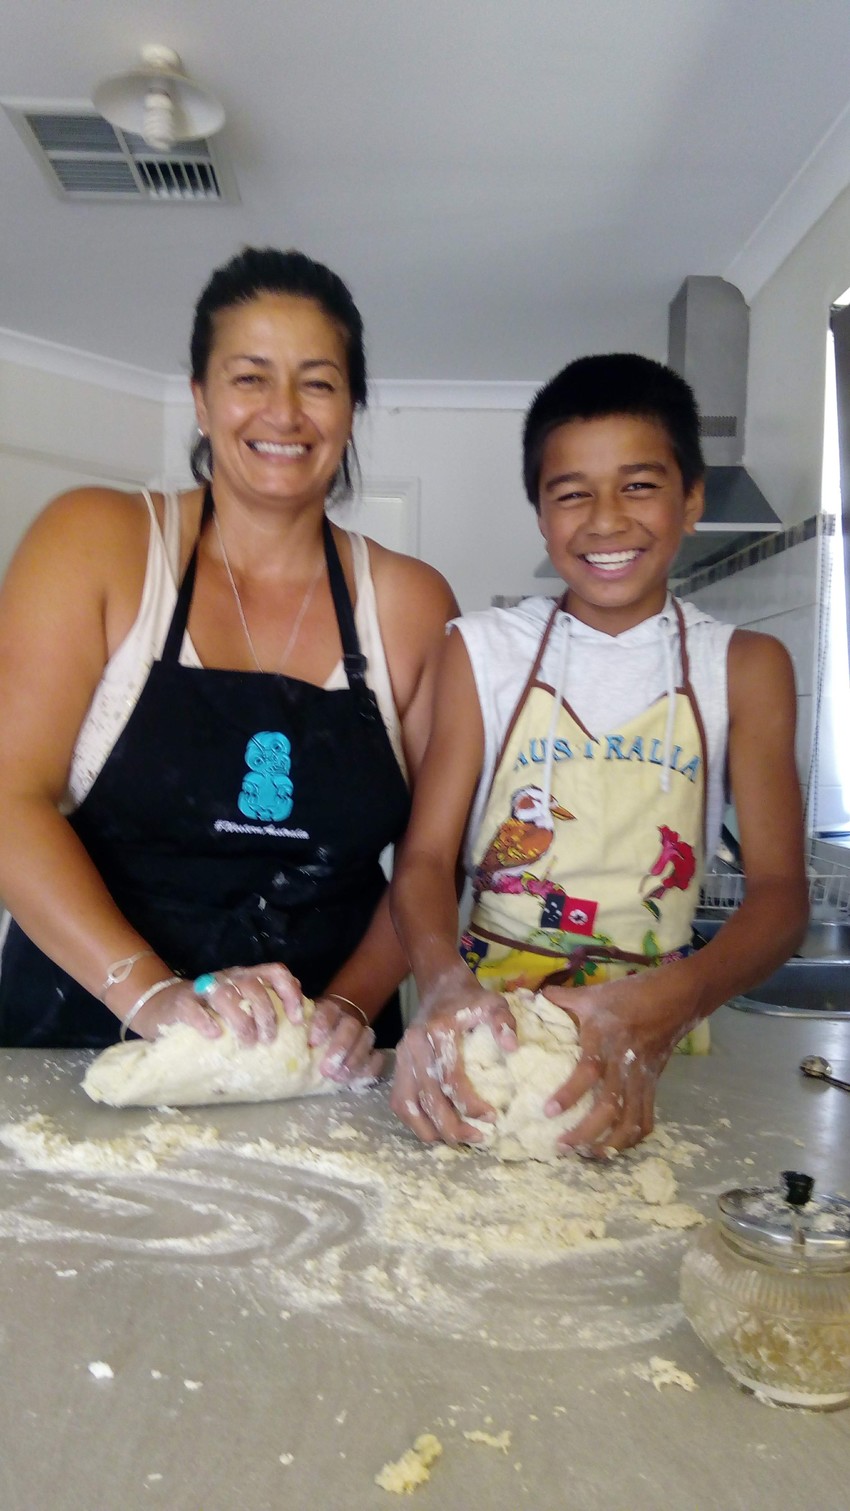 Ali-Benet (13yrs old) in the kitchen making doughnuts with Patrica